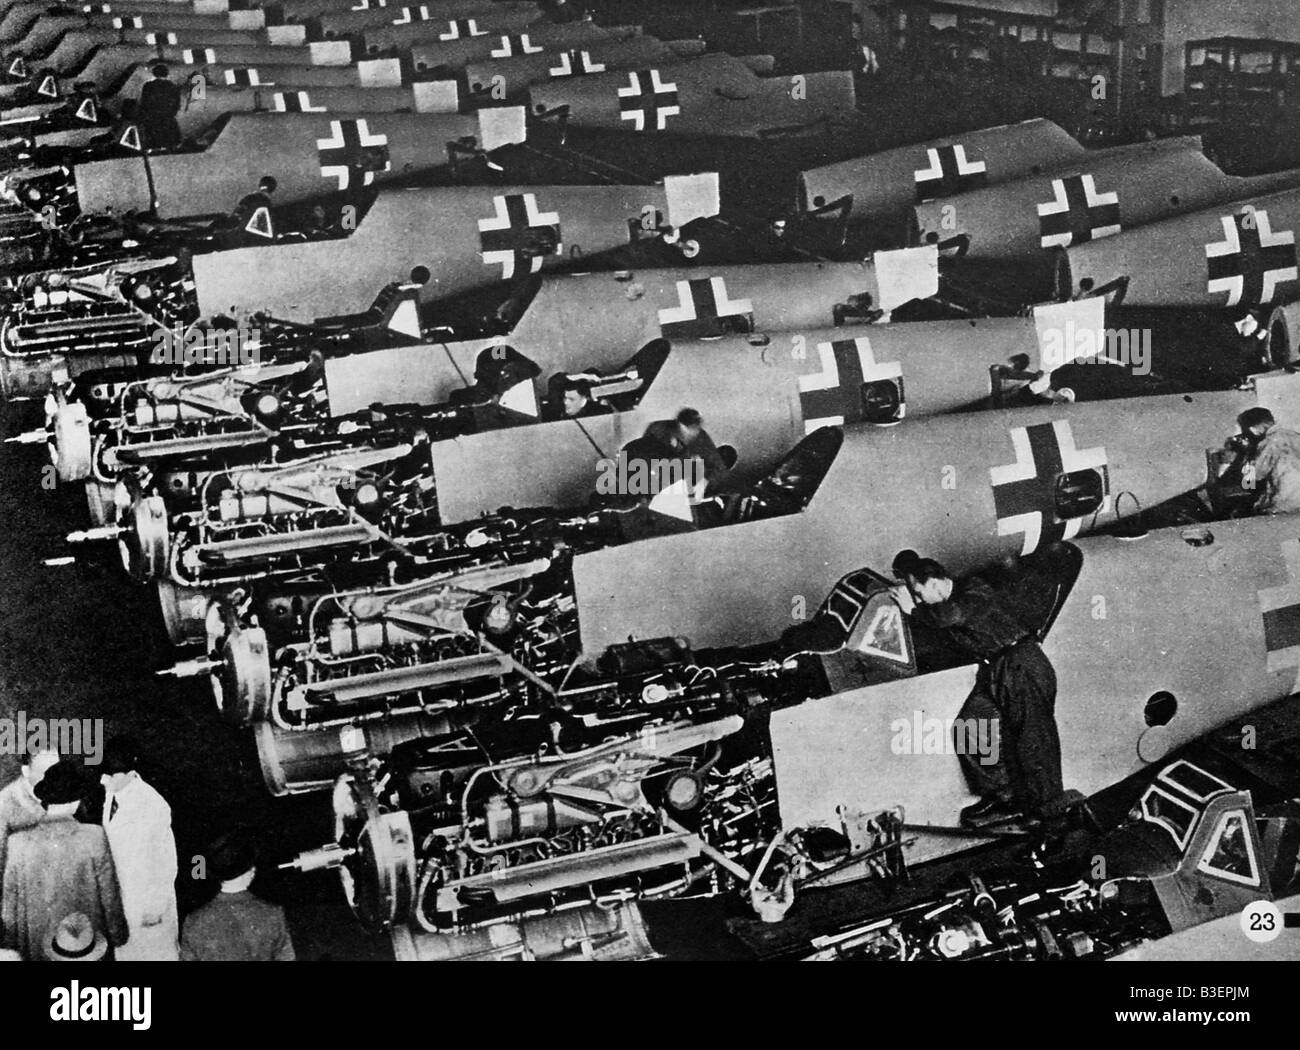 events, Second World War/WWII, Germany, arms industry, production of airplanes Messerschmitt Bf 109, circa 1940 - 1944, Stock Photo